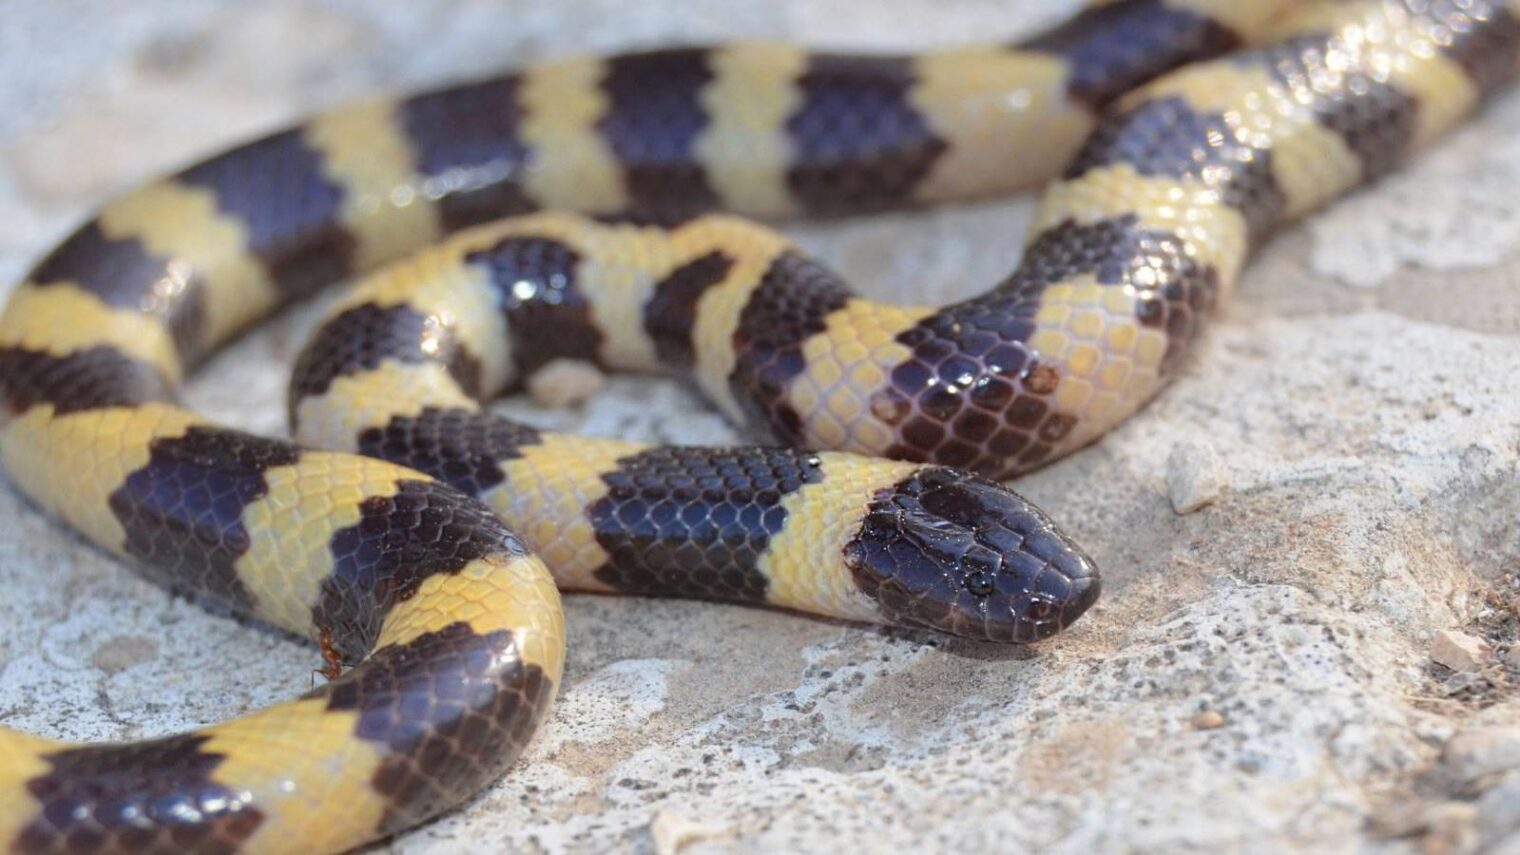 In rare discovery, scientists uncover new snake family - ISRAEL21c